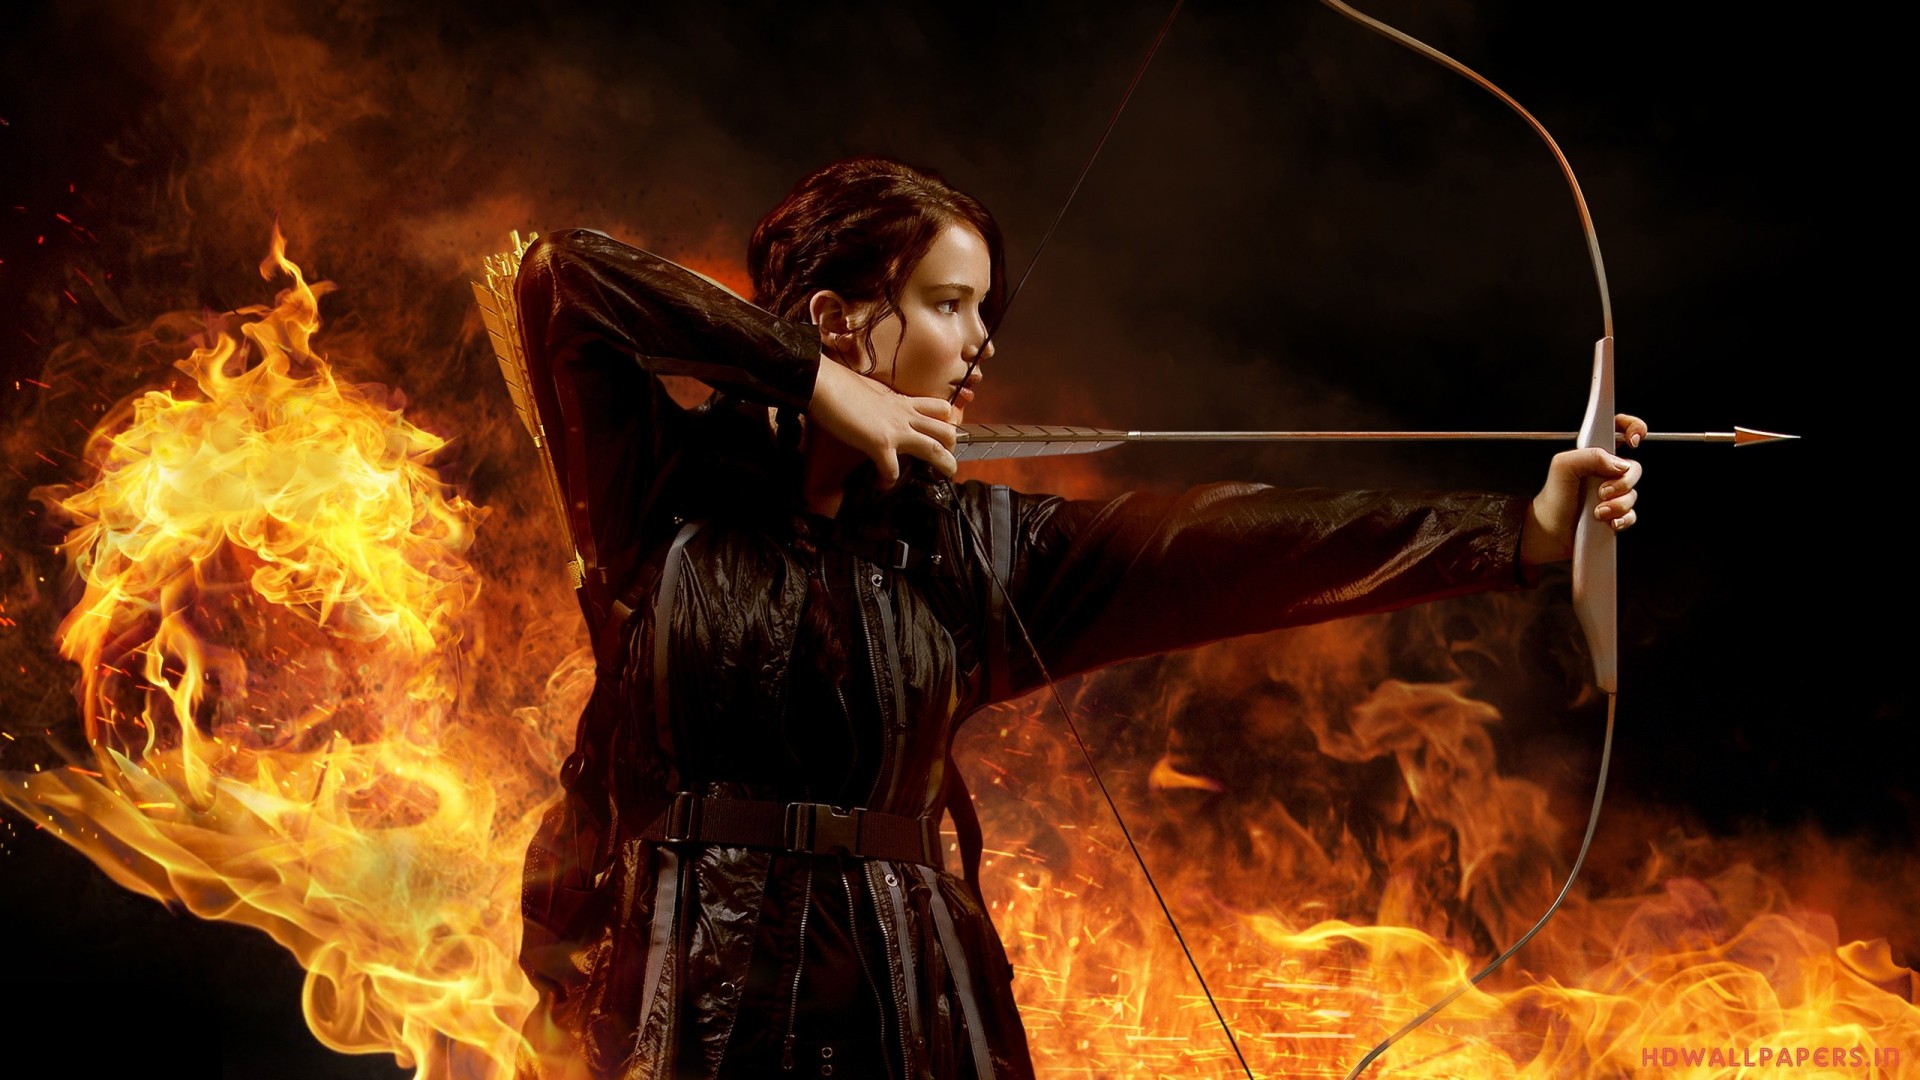 Hunger Games Bow and Arrow - High Definition, High Resolution HD Wallpapers  : High Definition, High Resolution HD Wallpapers